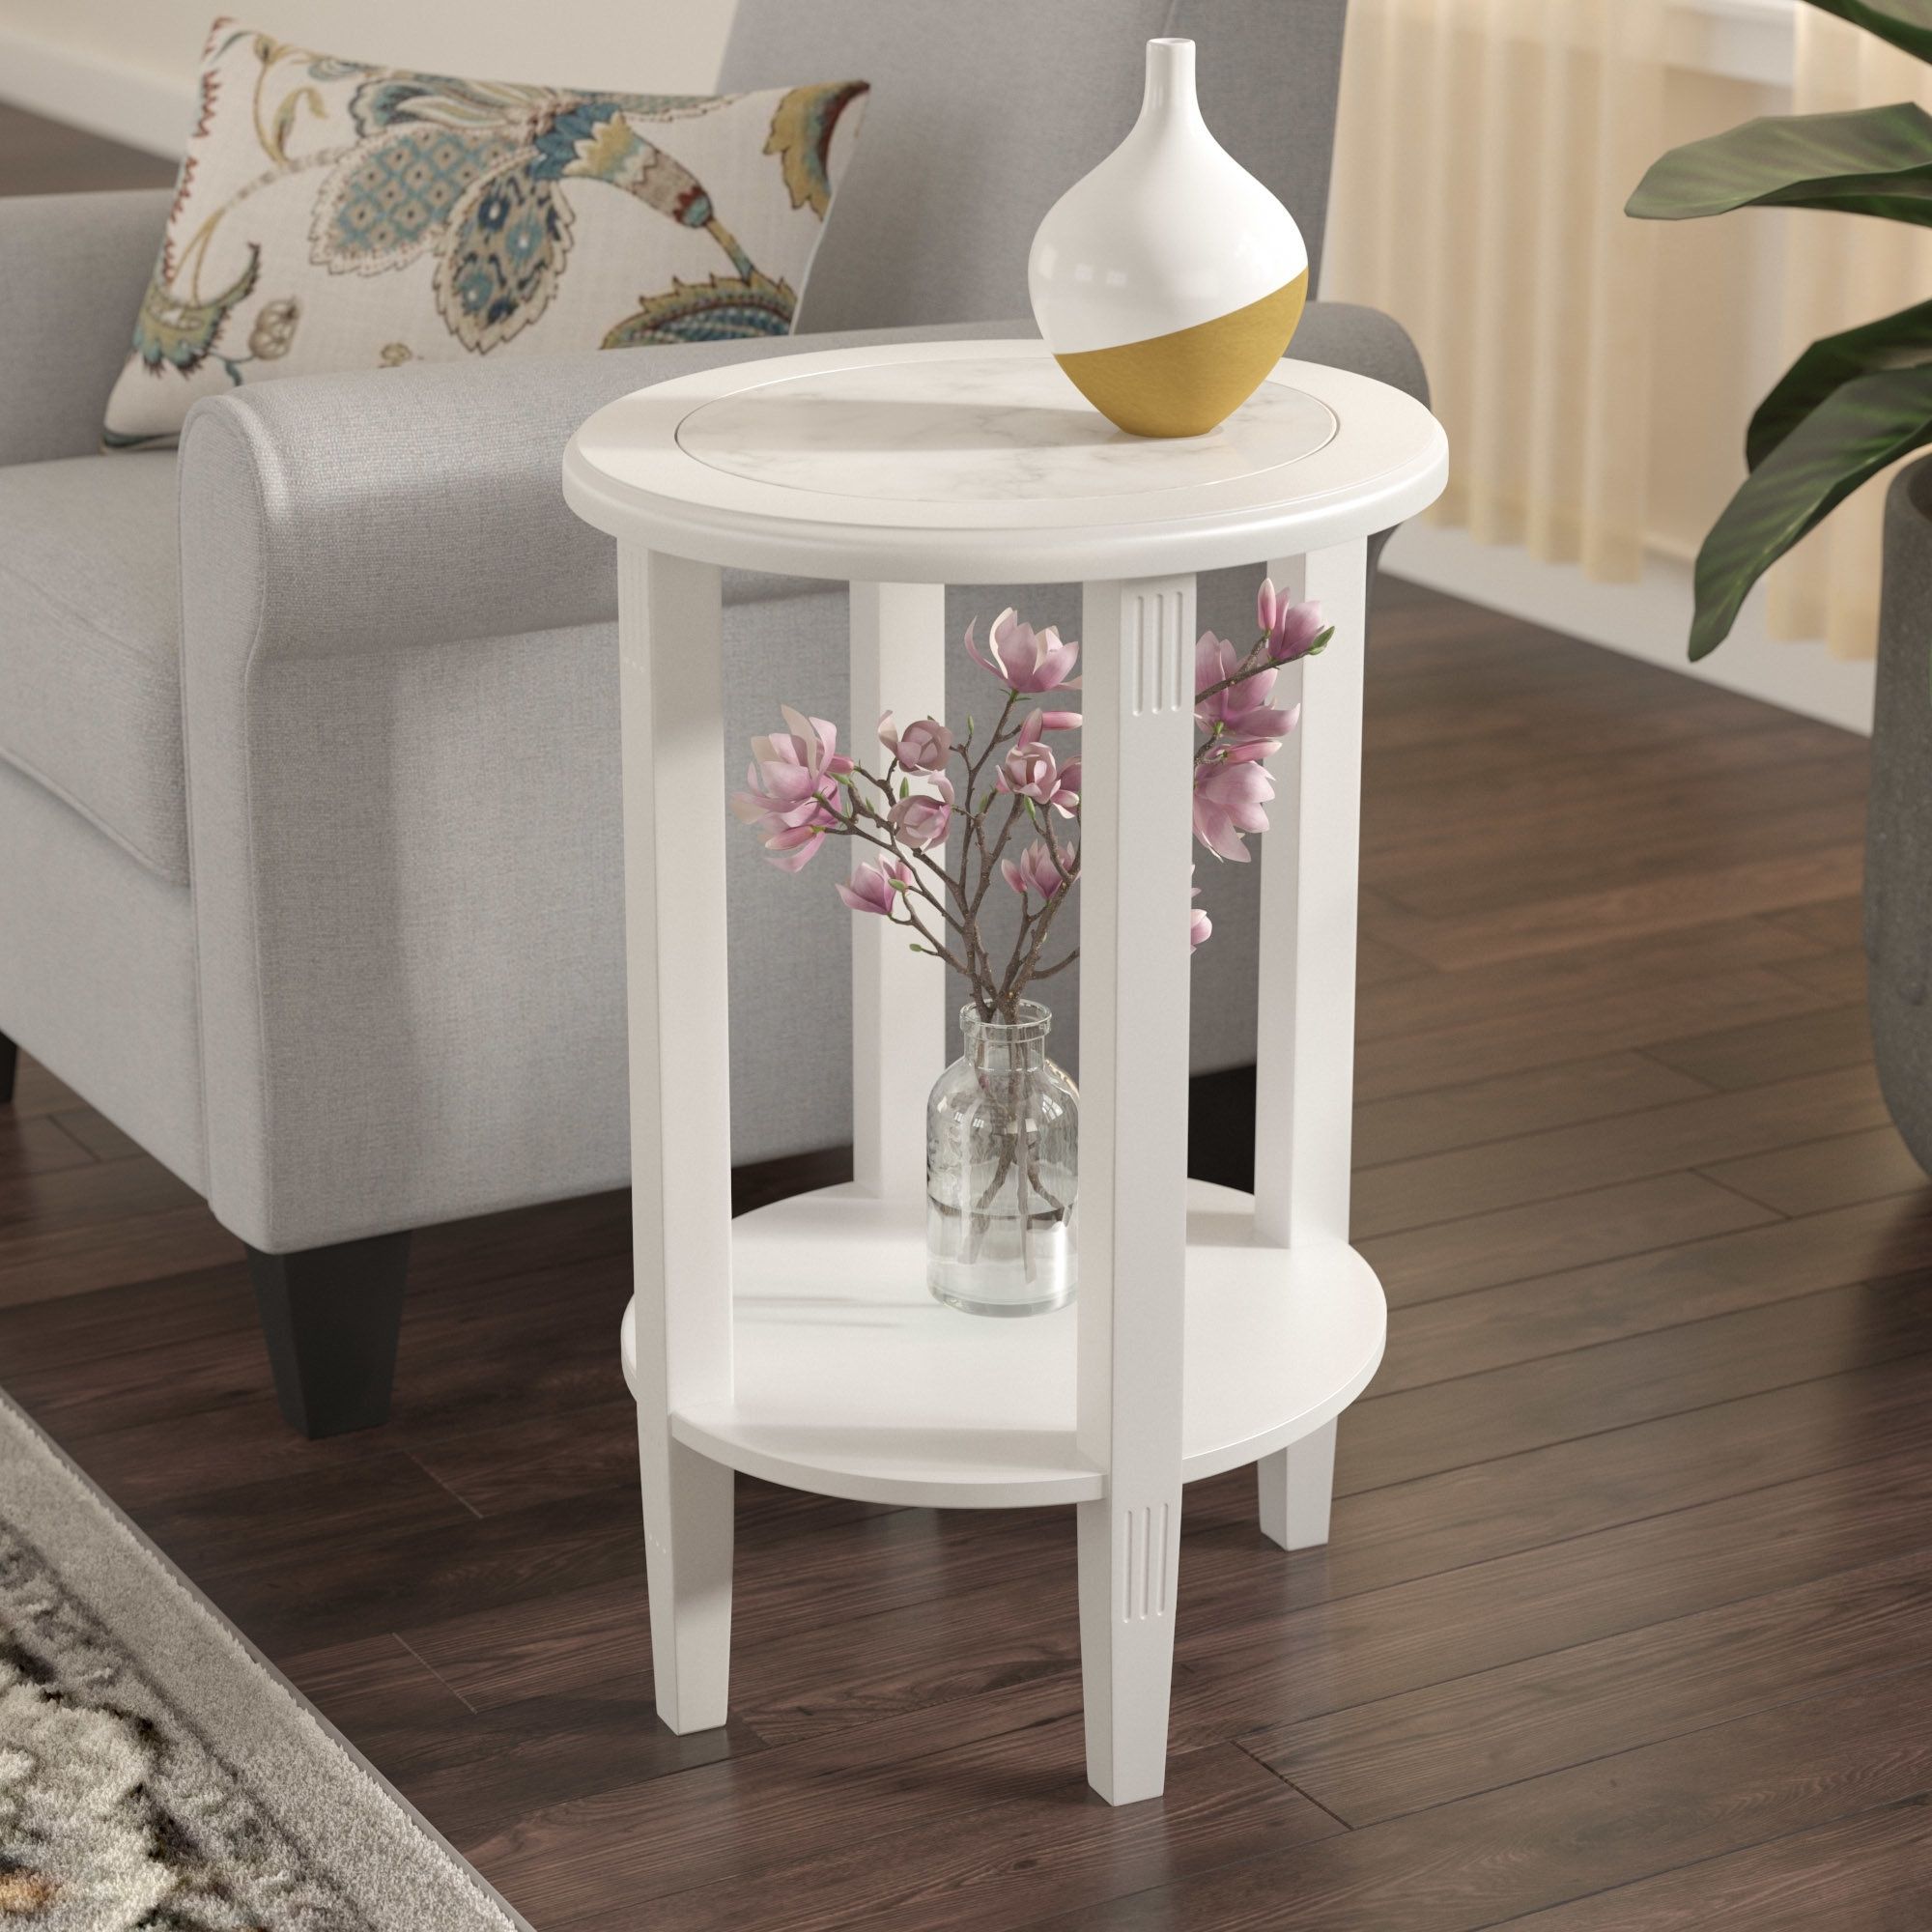 Charlton Home Versailles End Table & Reviews | Wayfair Inside Most Current Chapleau Ii 7 Piece Extension Dining Tables With Side Chairs (View 19 of 20)